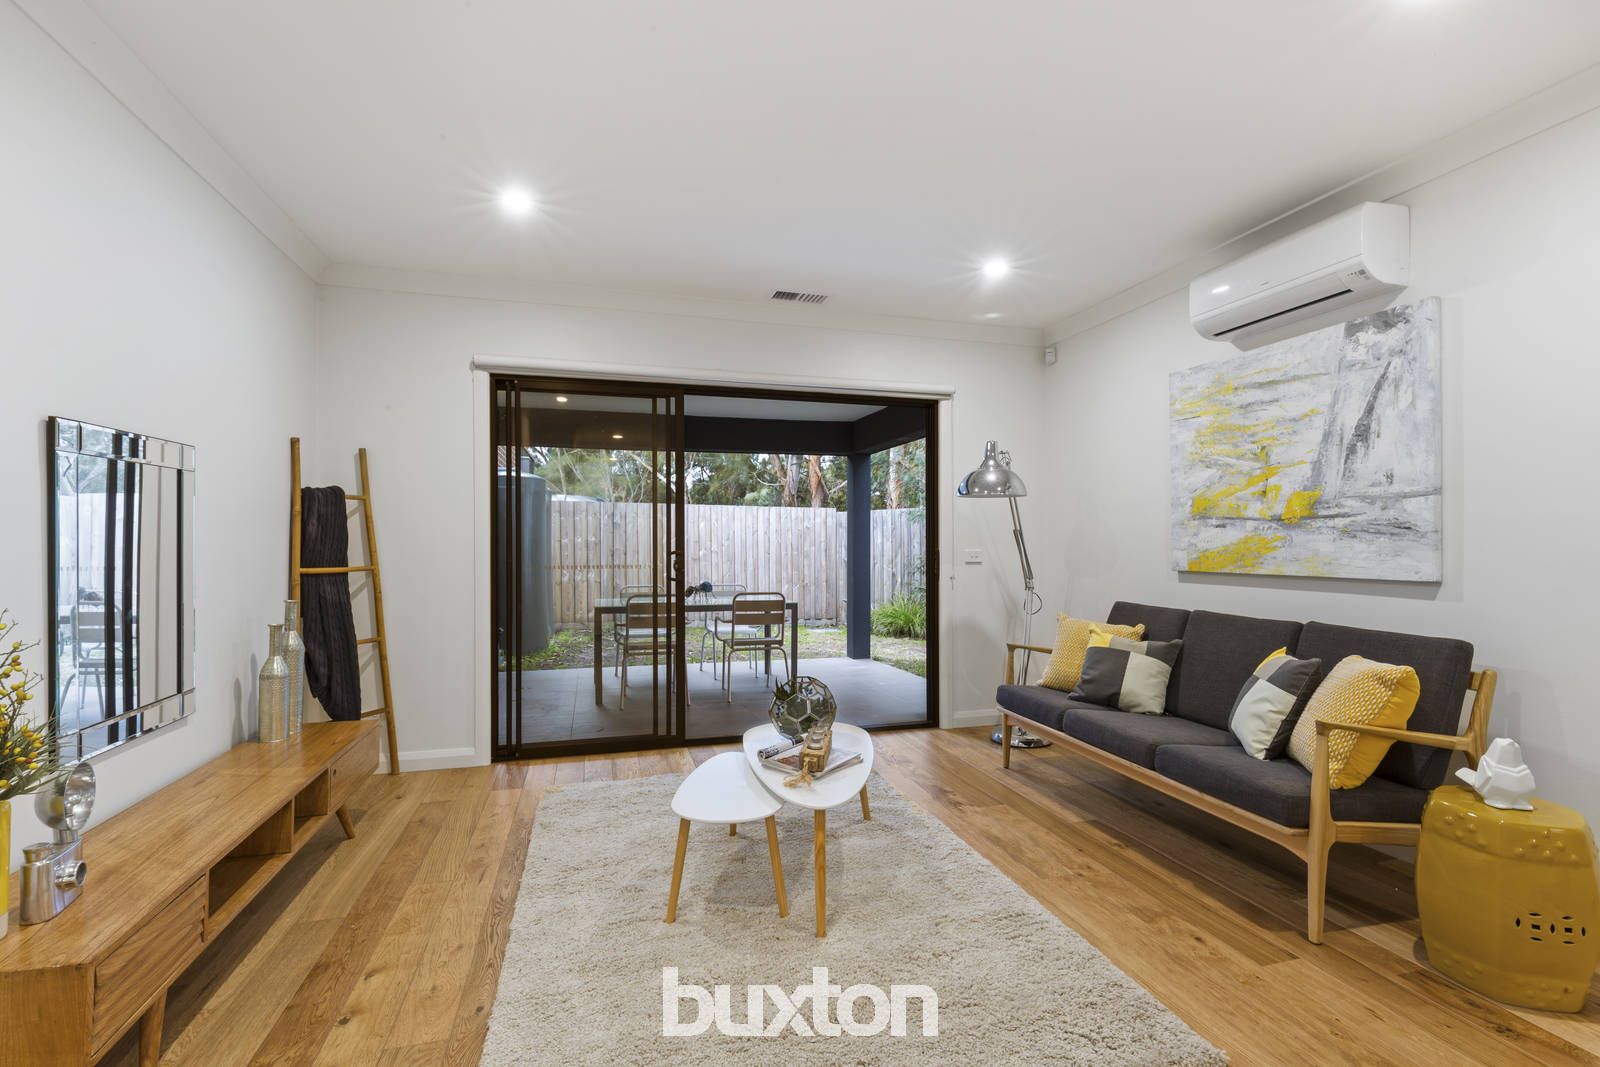 40 Old Dandenong Road, Oakleigh South VIC 3167, Image 1